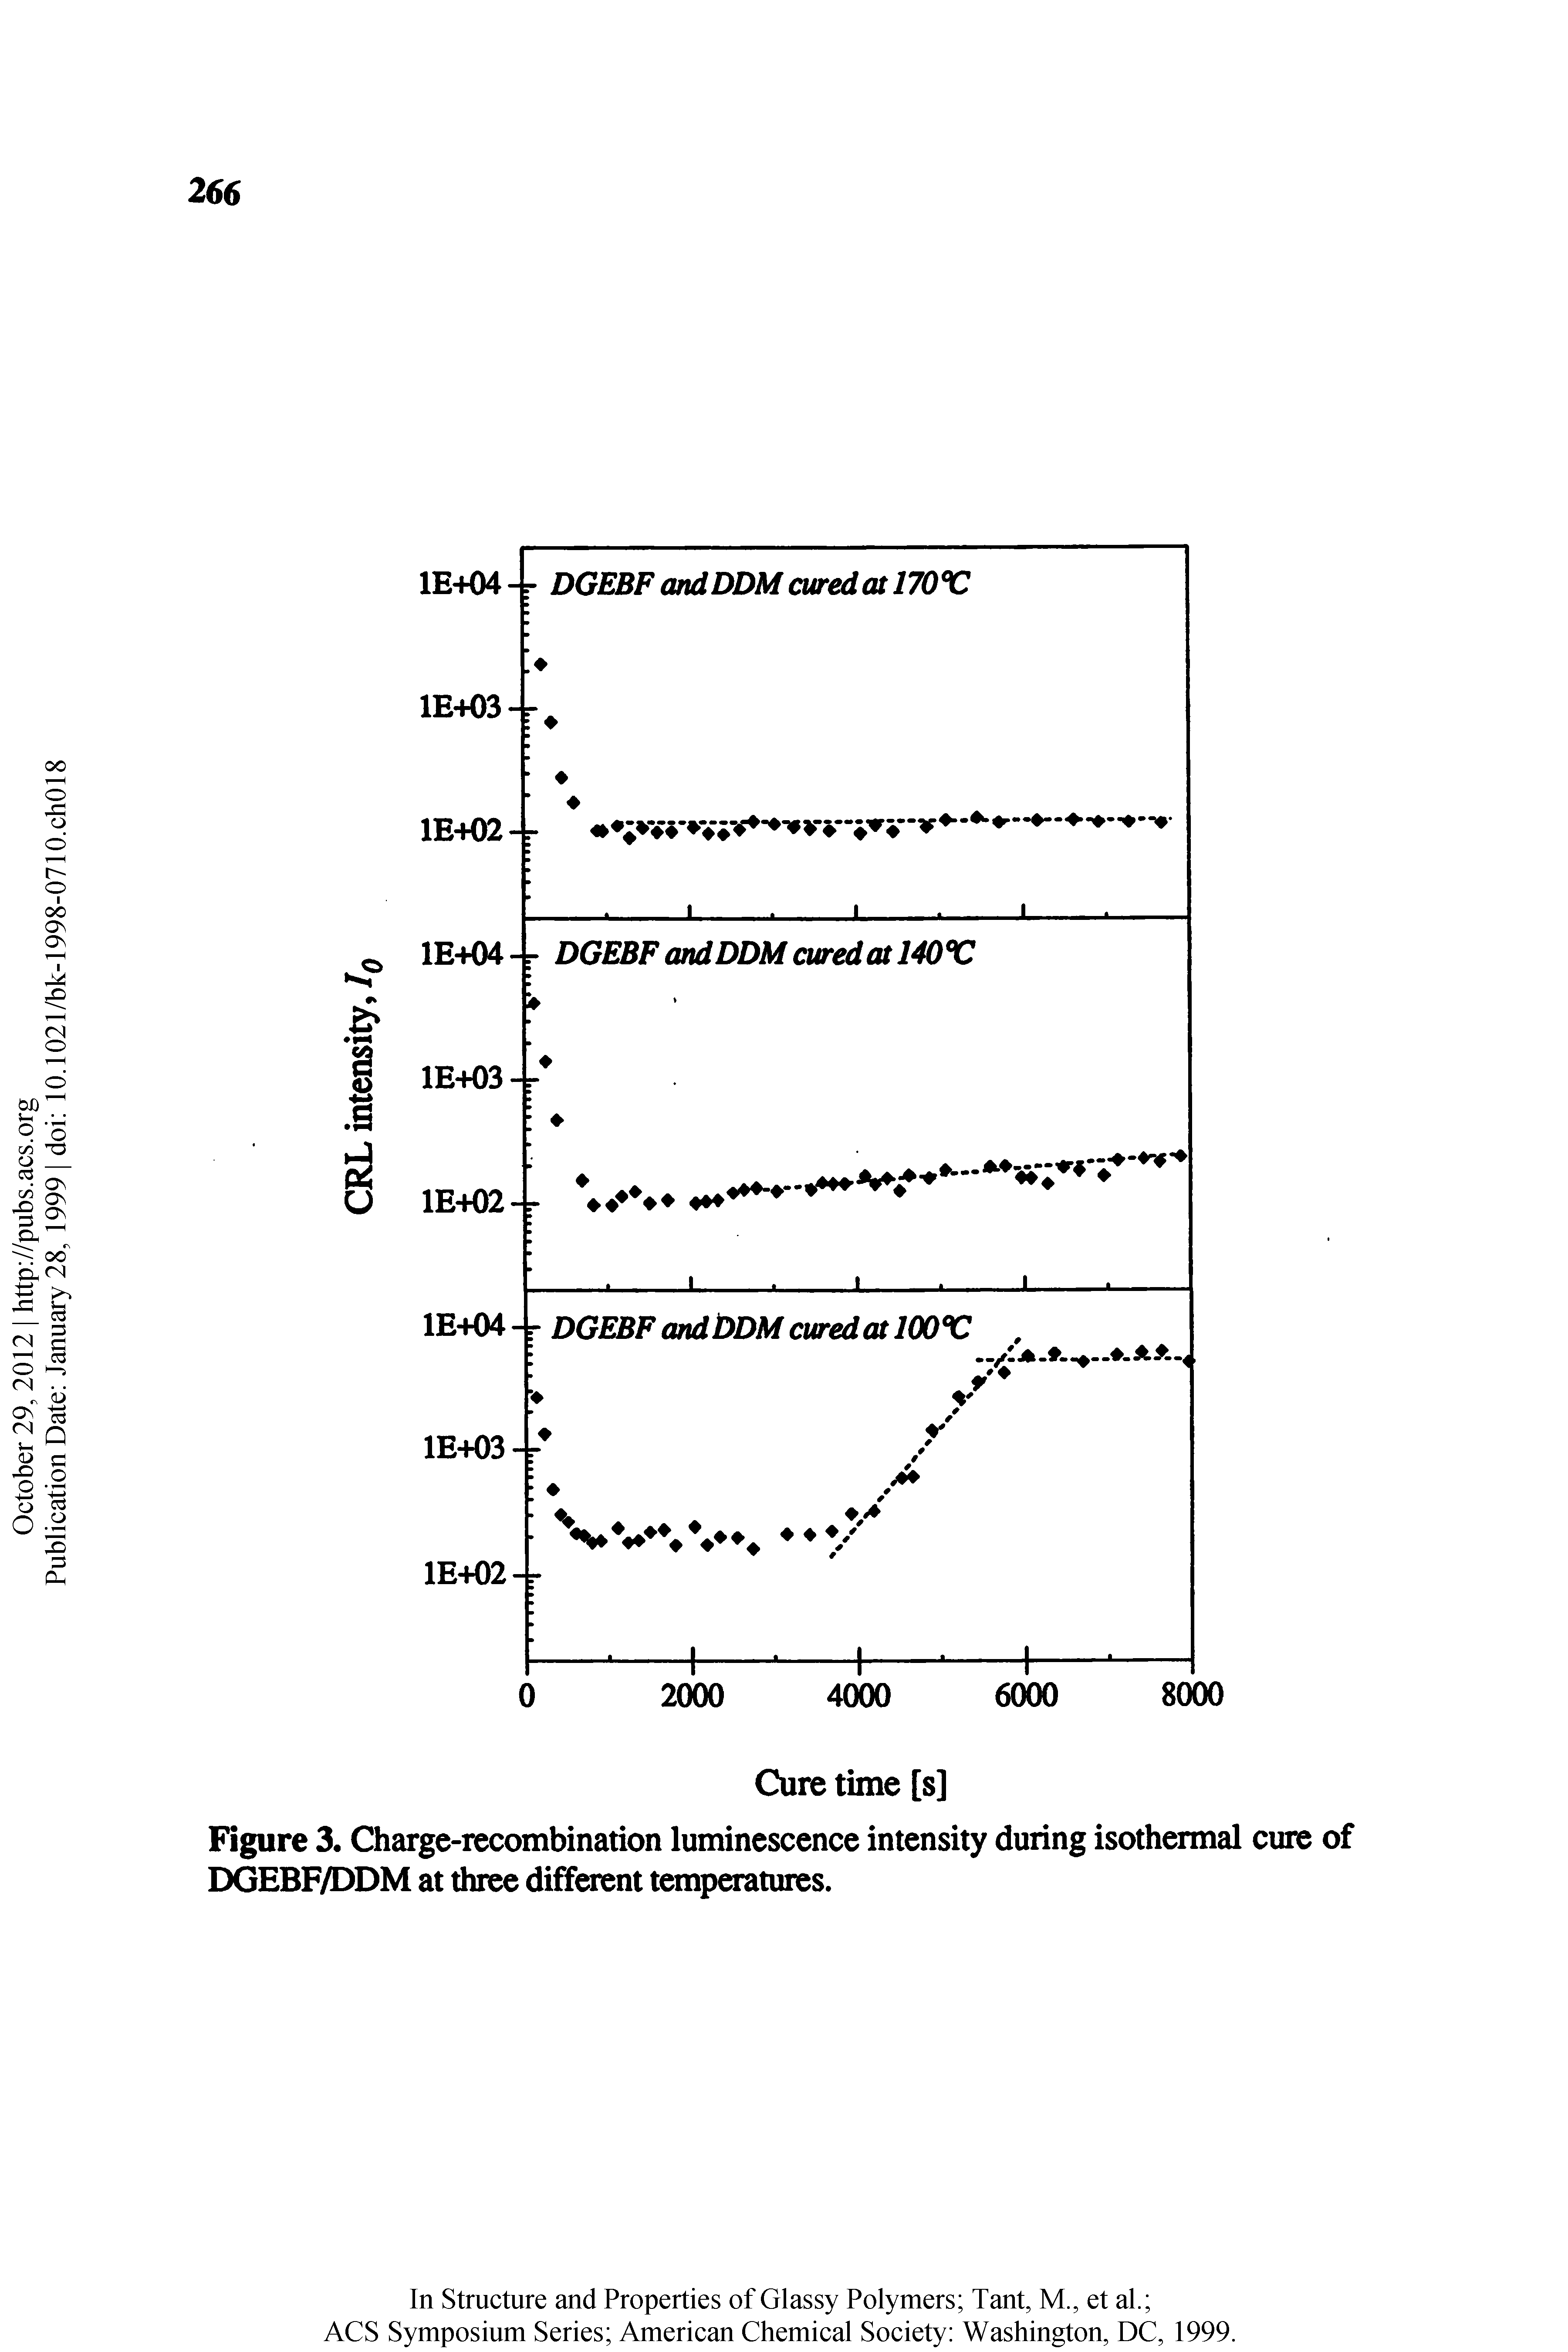 Figure 3. Charge-recombination luminescence intensity during isothermal cure of DGEBF/DDM at three diffoent temperatures.